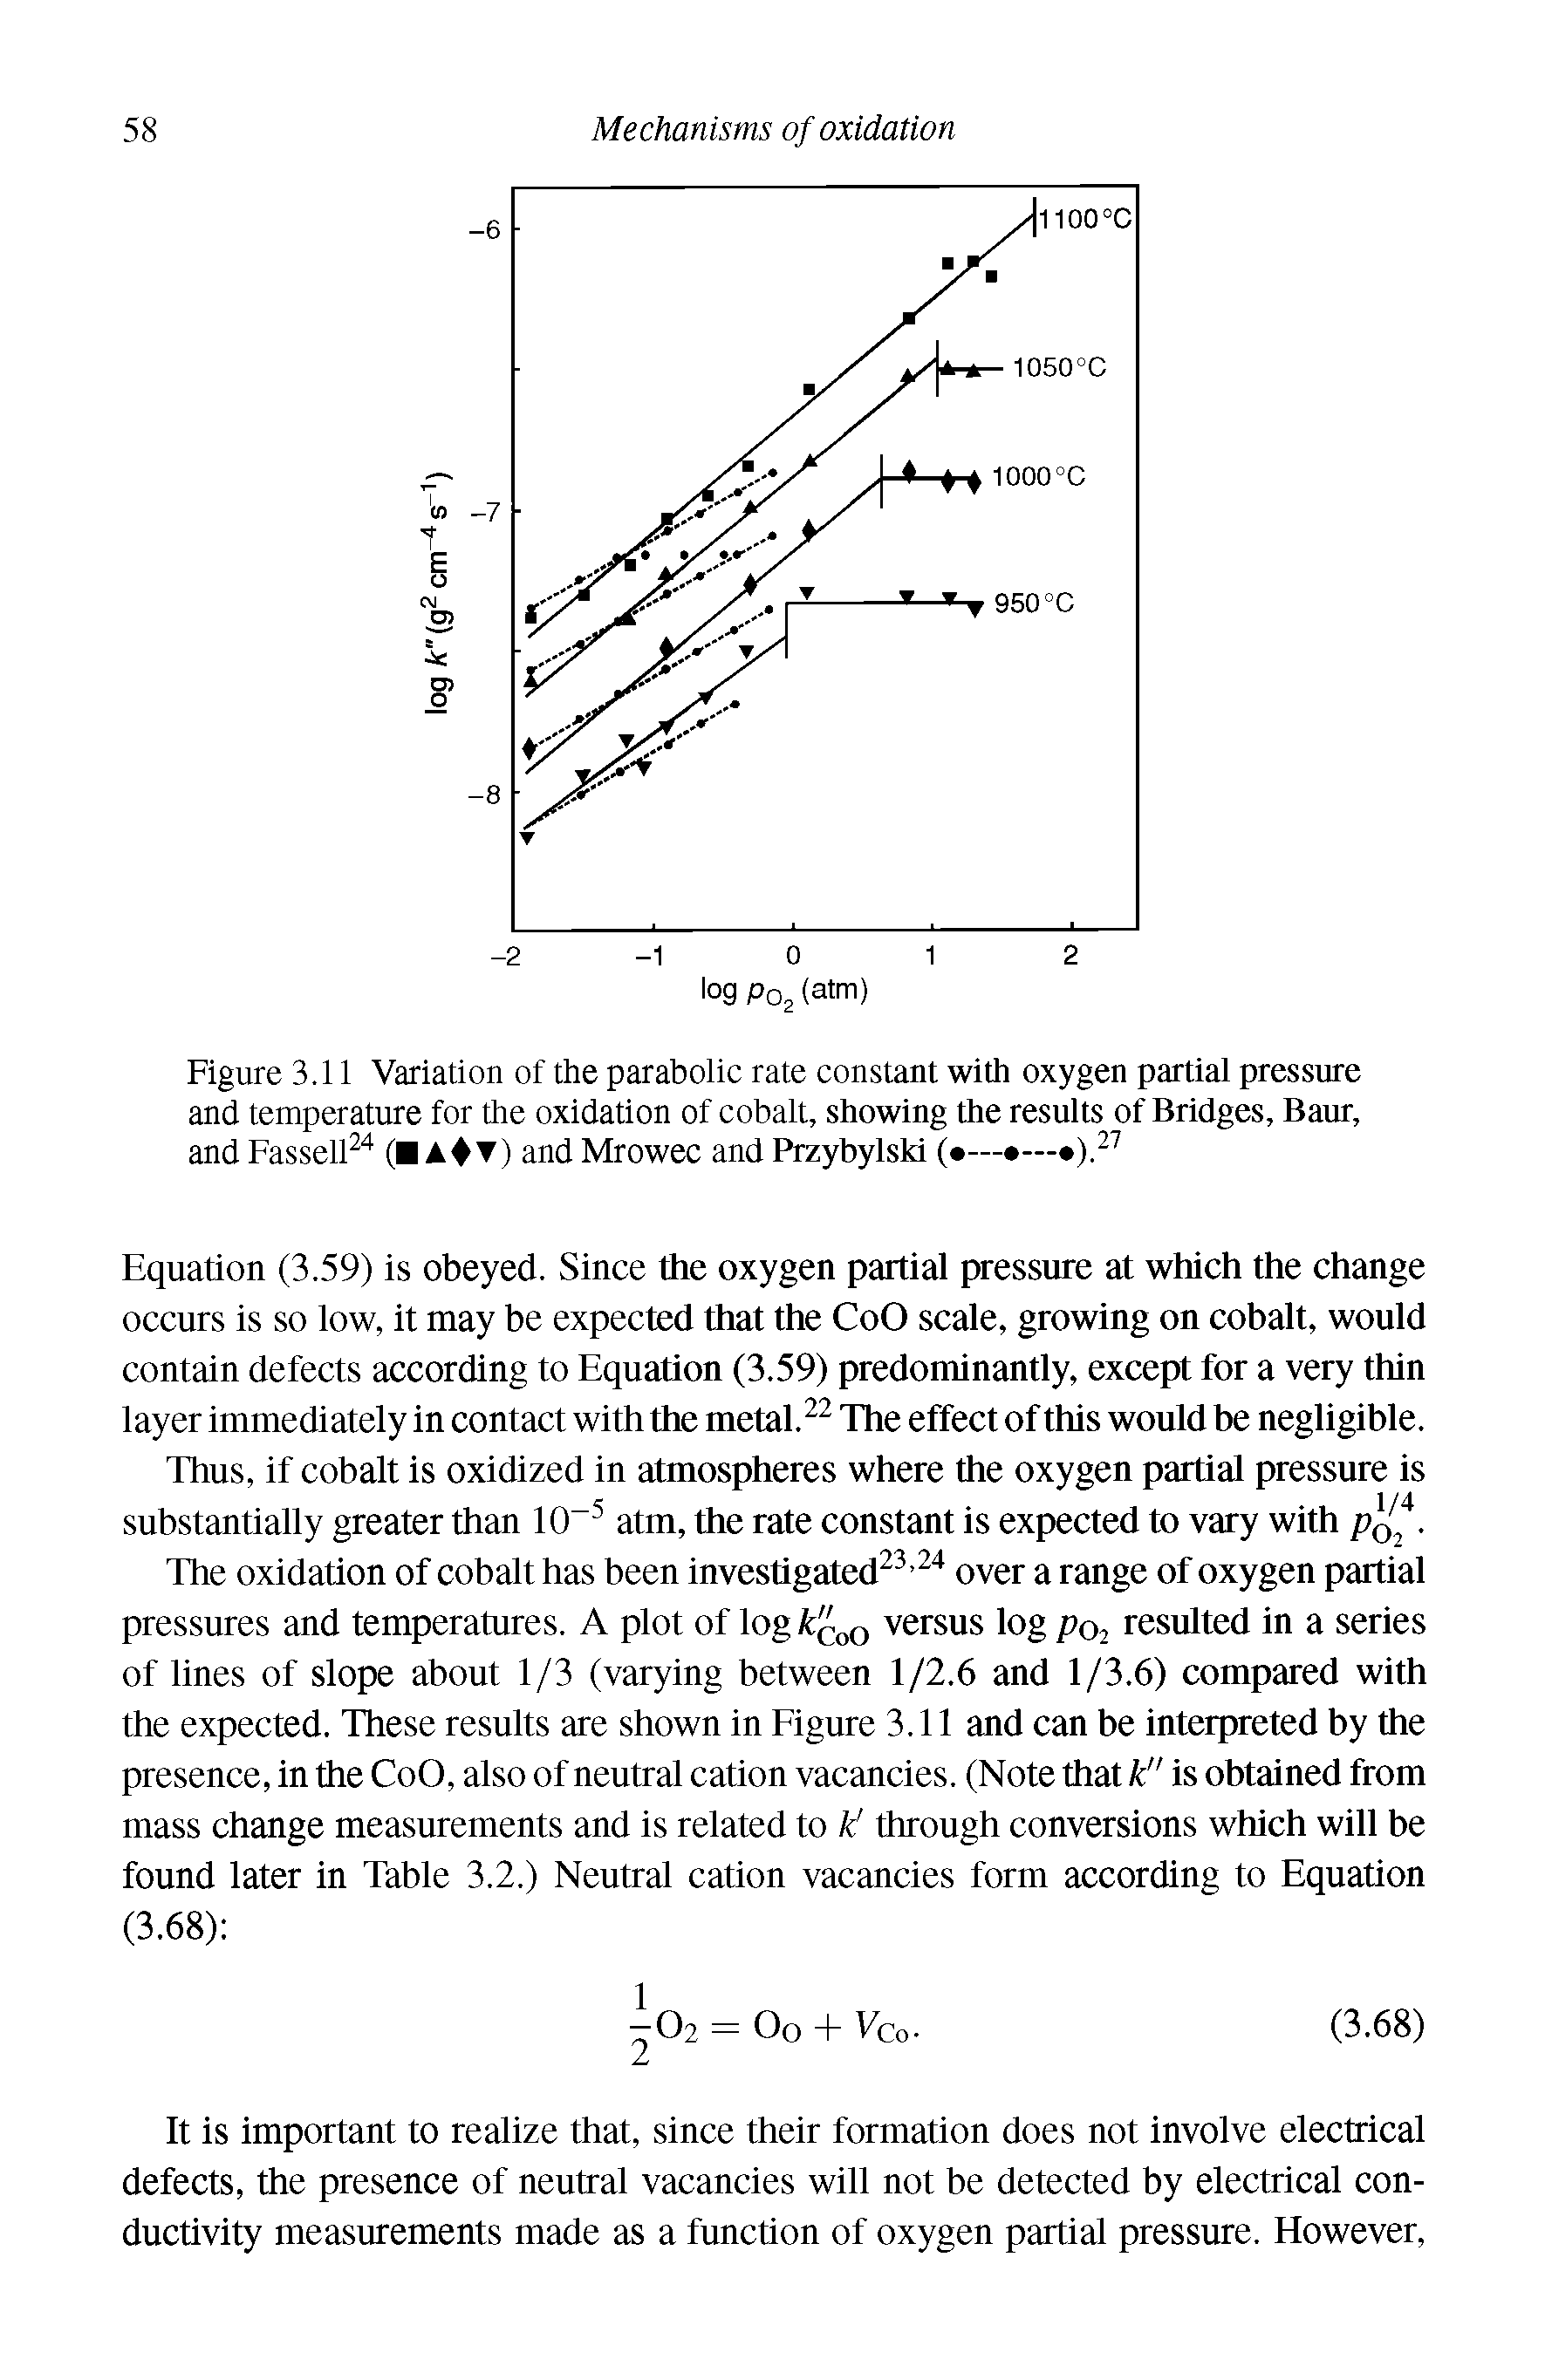 Figure 3.11 Variation of the parabolic rate constant with oxygen partial pressure and temperature for the oxidation of cobalt, showing the results of Bridges, Bam-, and Fassell ( A T) and Mrowec and Przybylski ( — —...